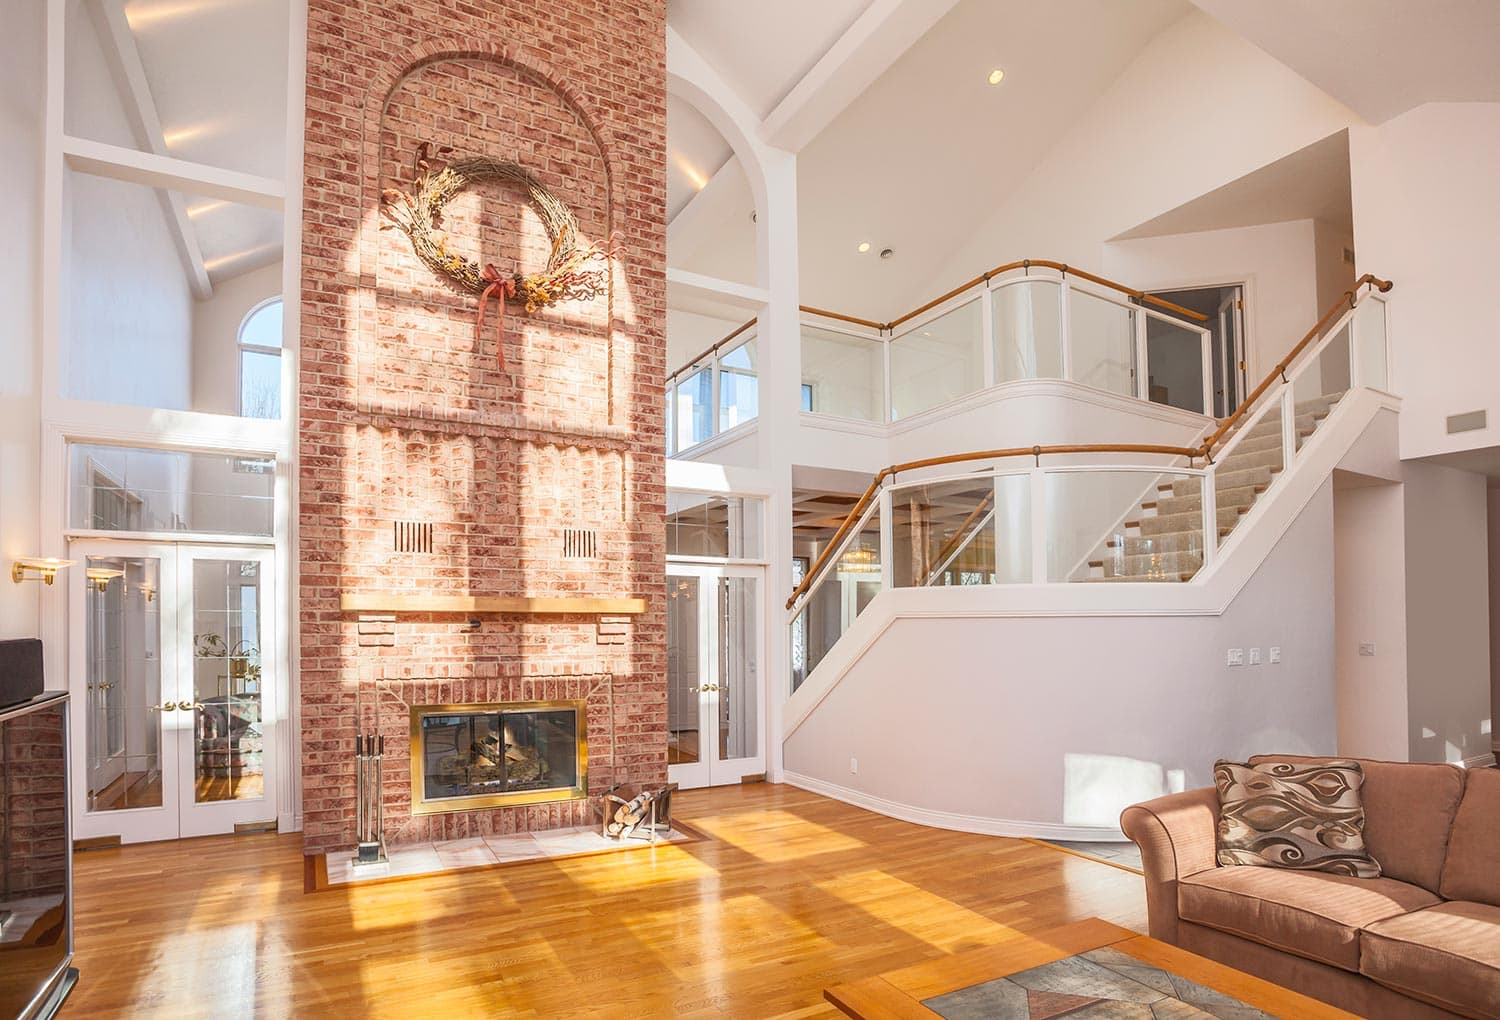 Amazing home interior with brick fireplace and spectacular glass staircase